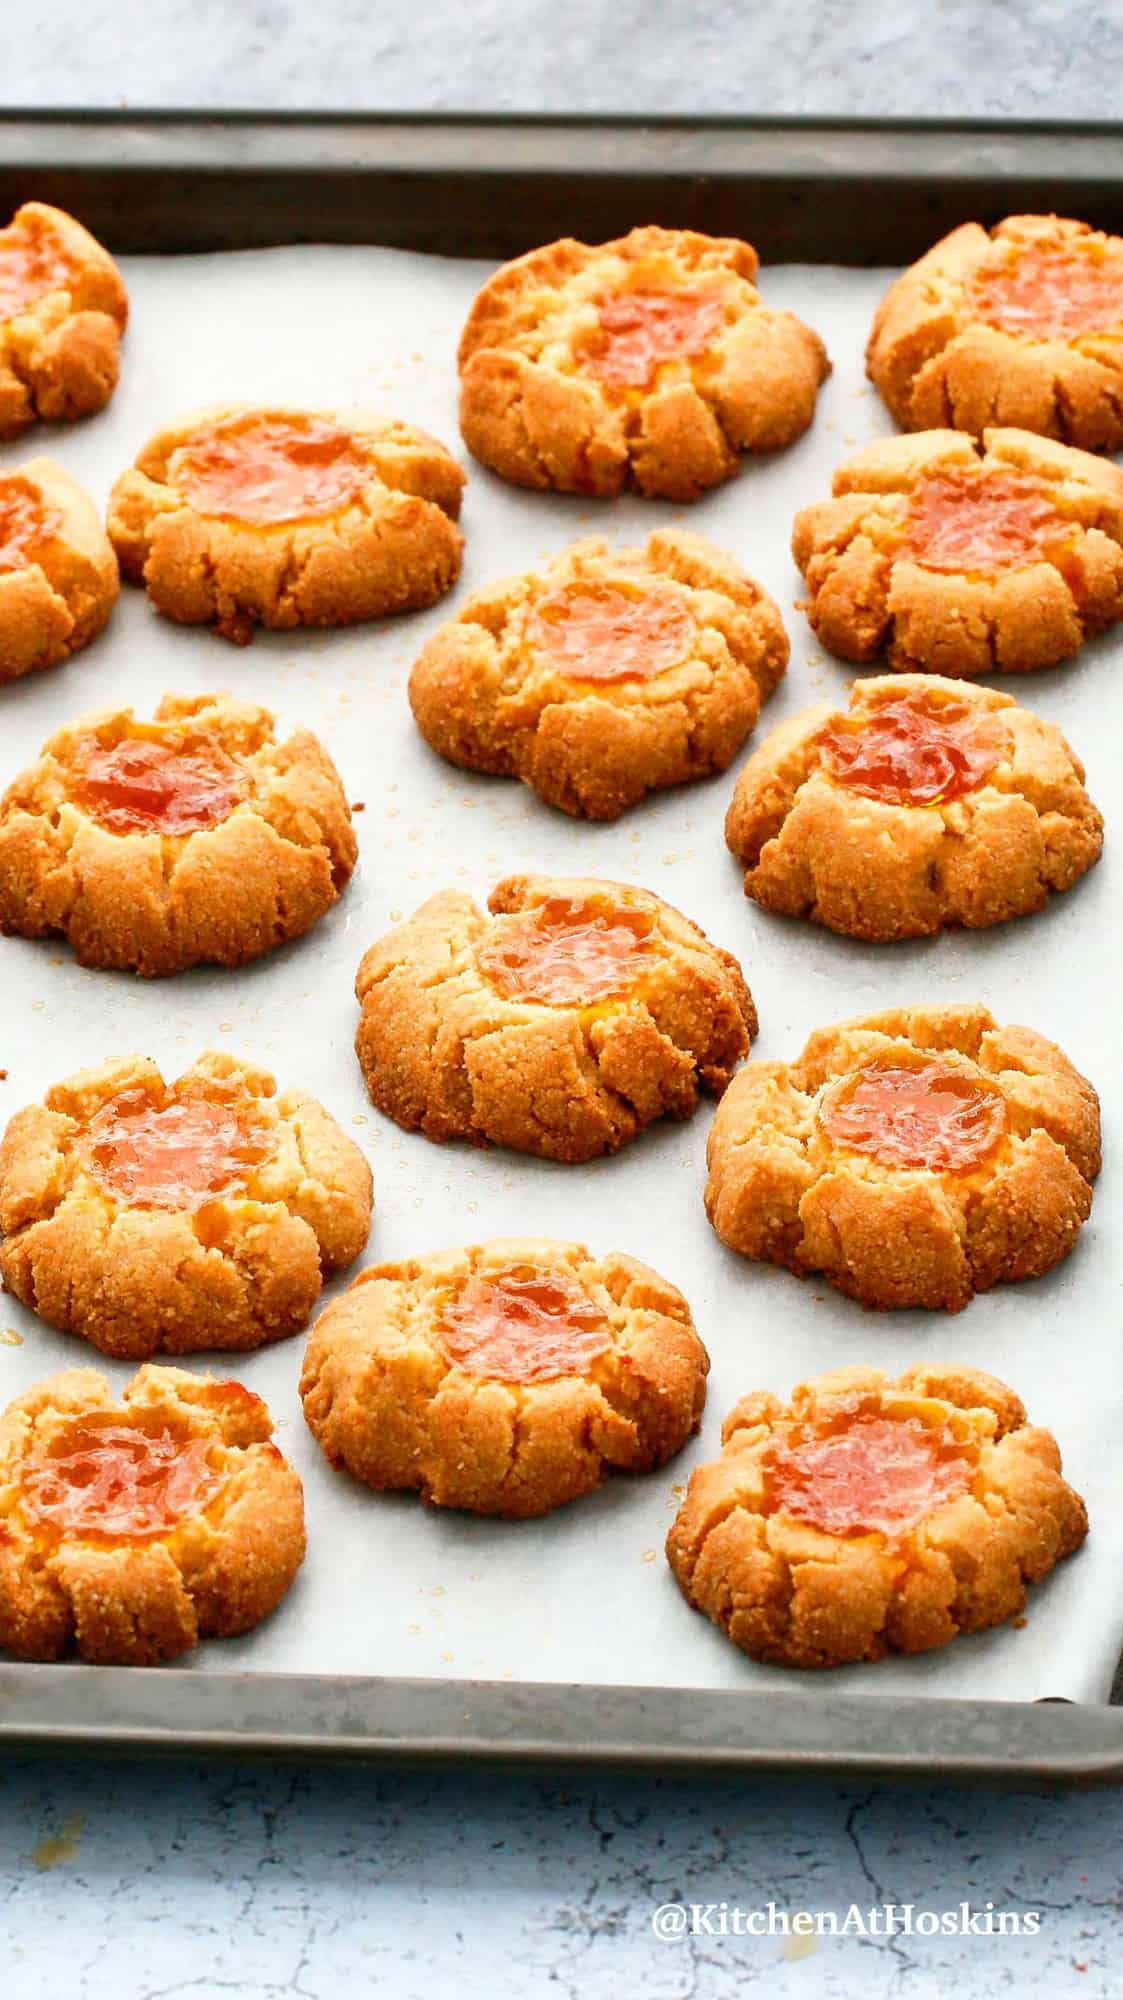 apricot thumbprint cookies on a baking tray.